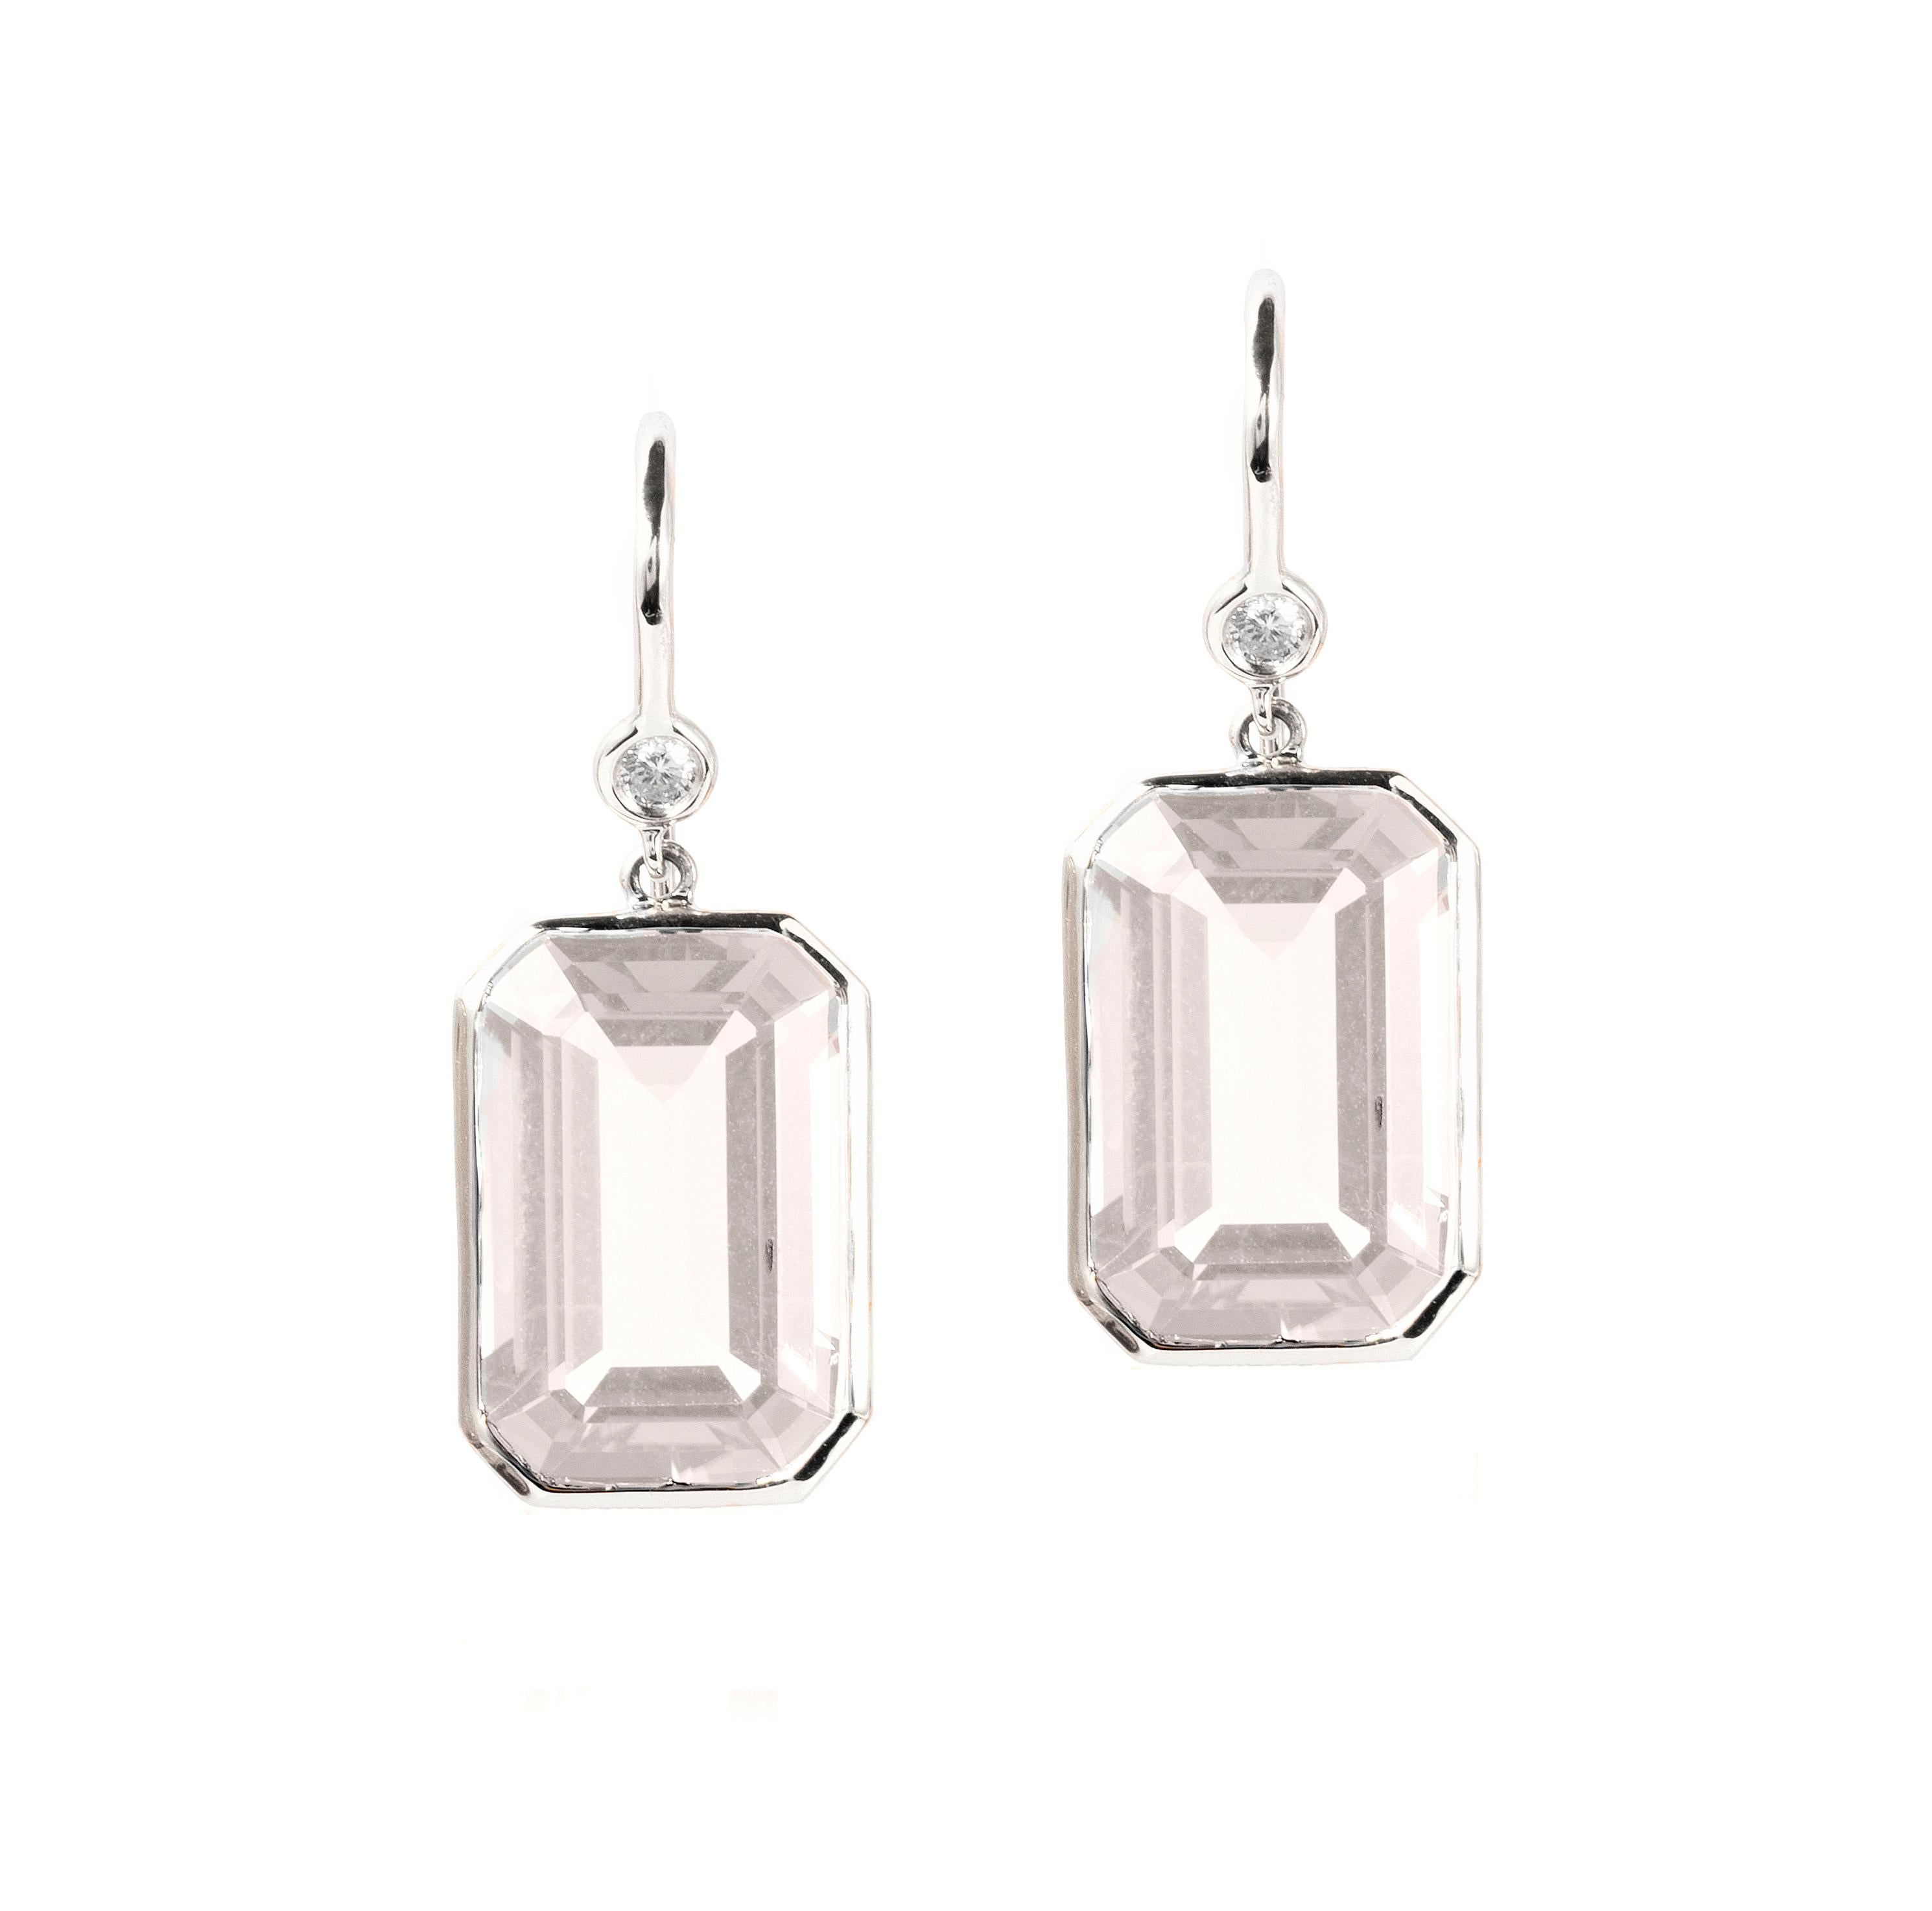 Moon Quartz Emerald cut Earrings with Diamonds on Wire in 18K White Gold from 'Gossip' Collection
 Stone Size: 10 x 15 mm 
 Diamonds: G-H / VS, Approx Wt:0.09 Cts